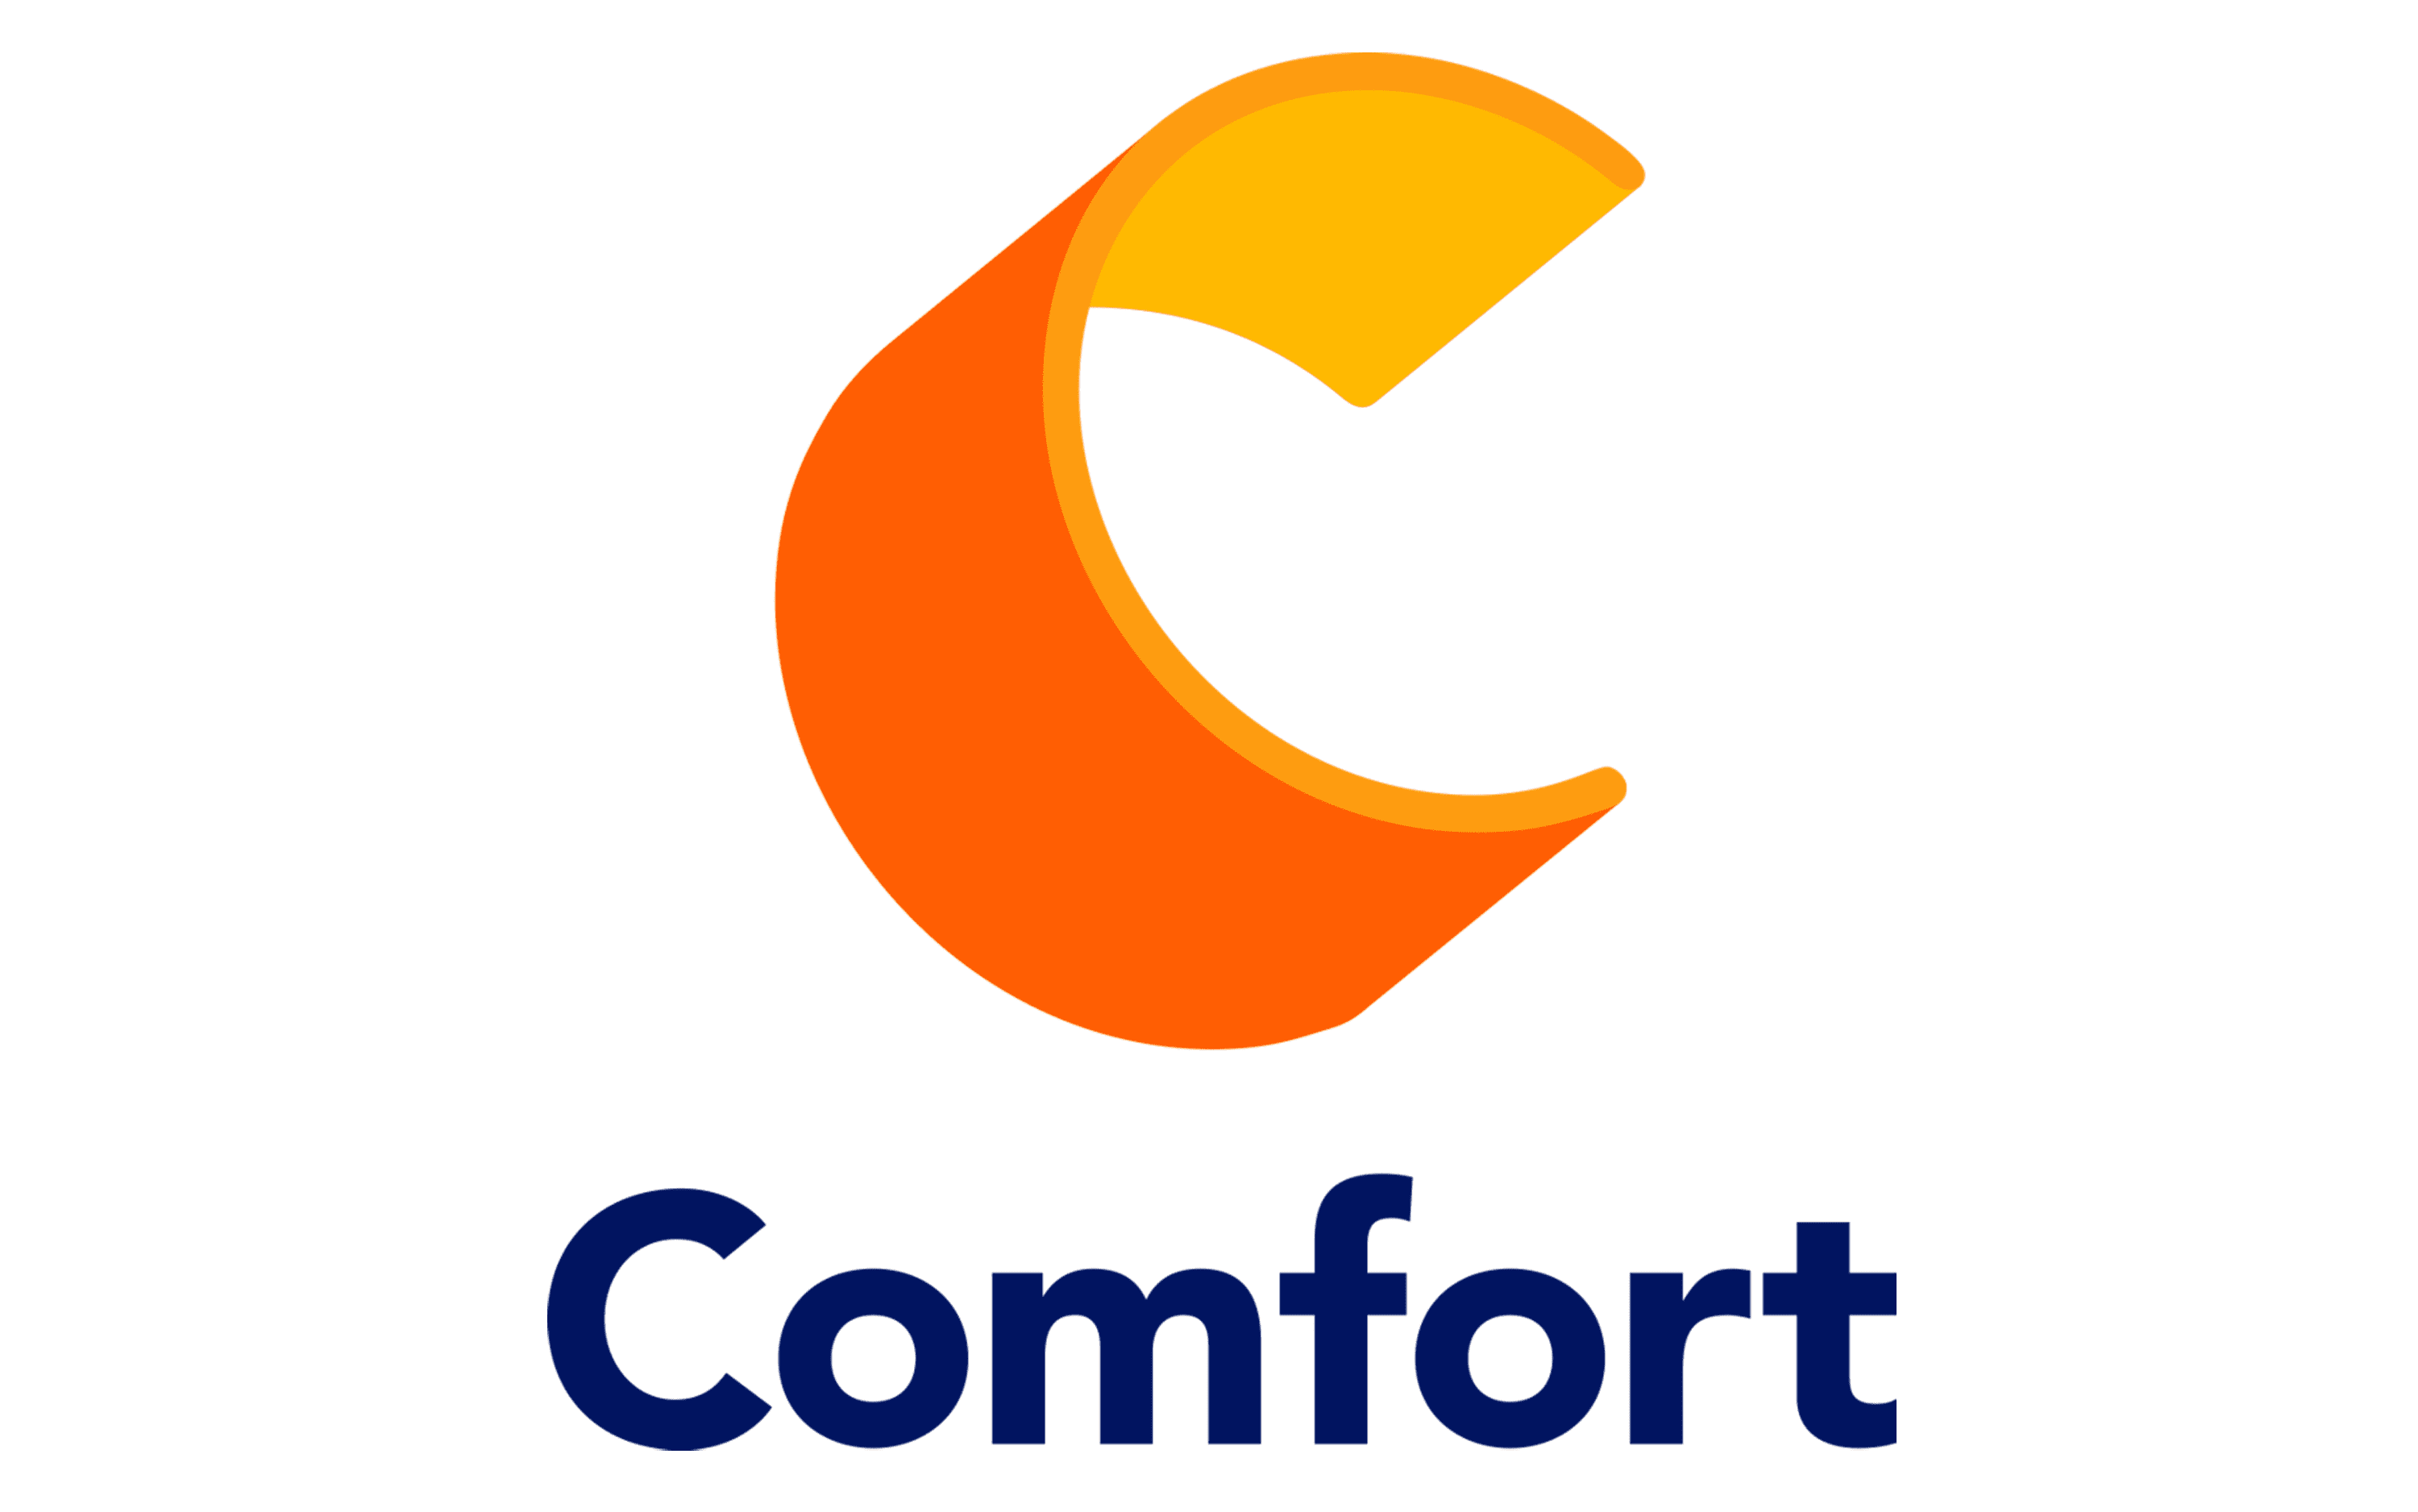 Comfort Inn logo and symbol, meaning, history, PNG